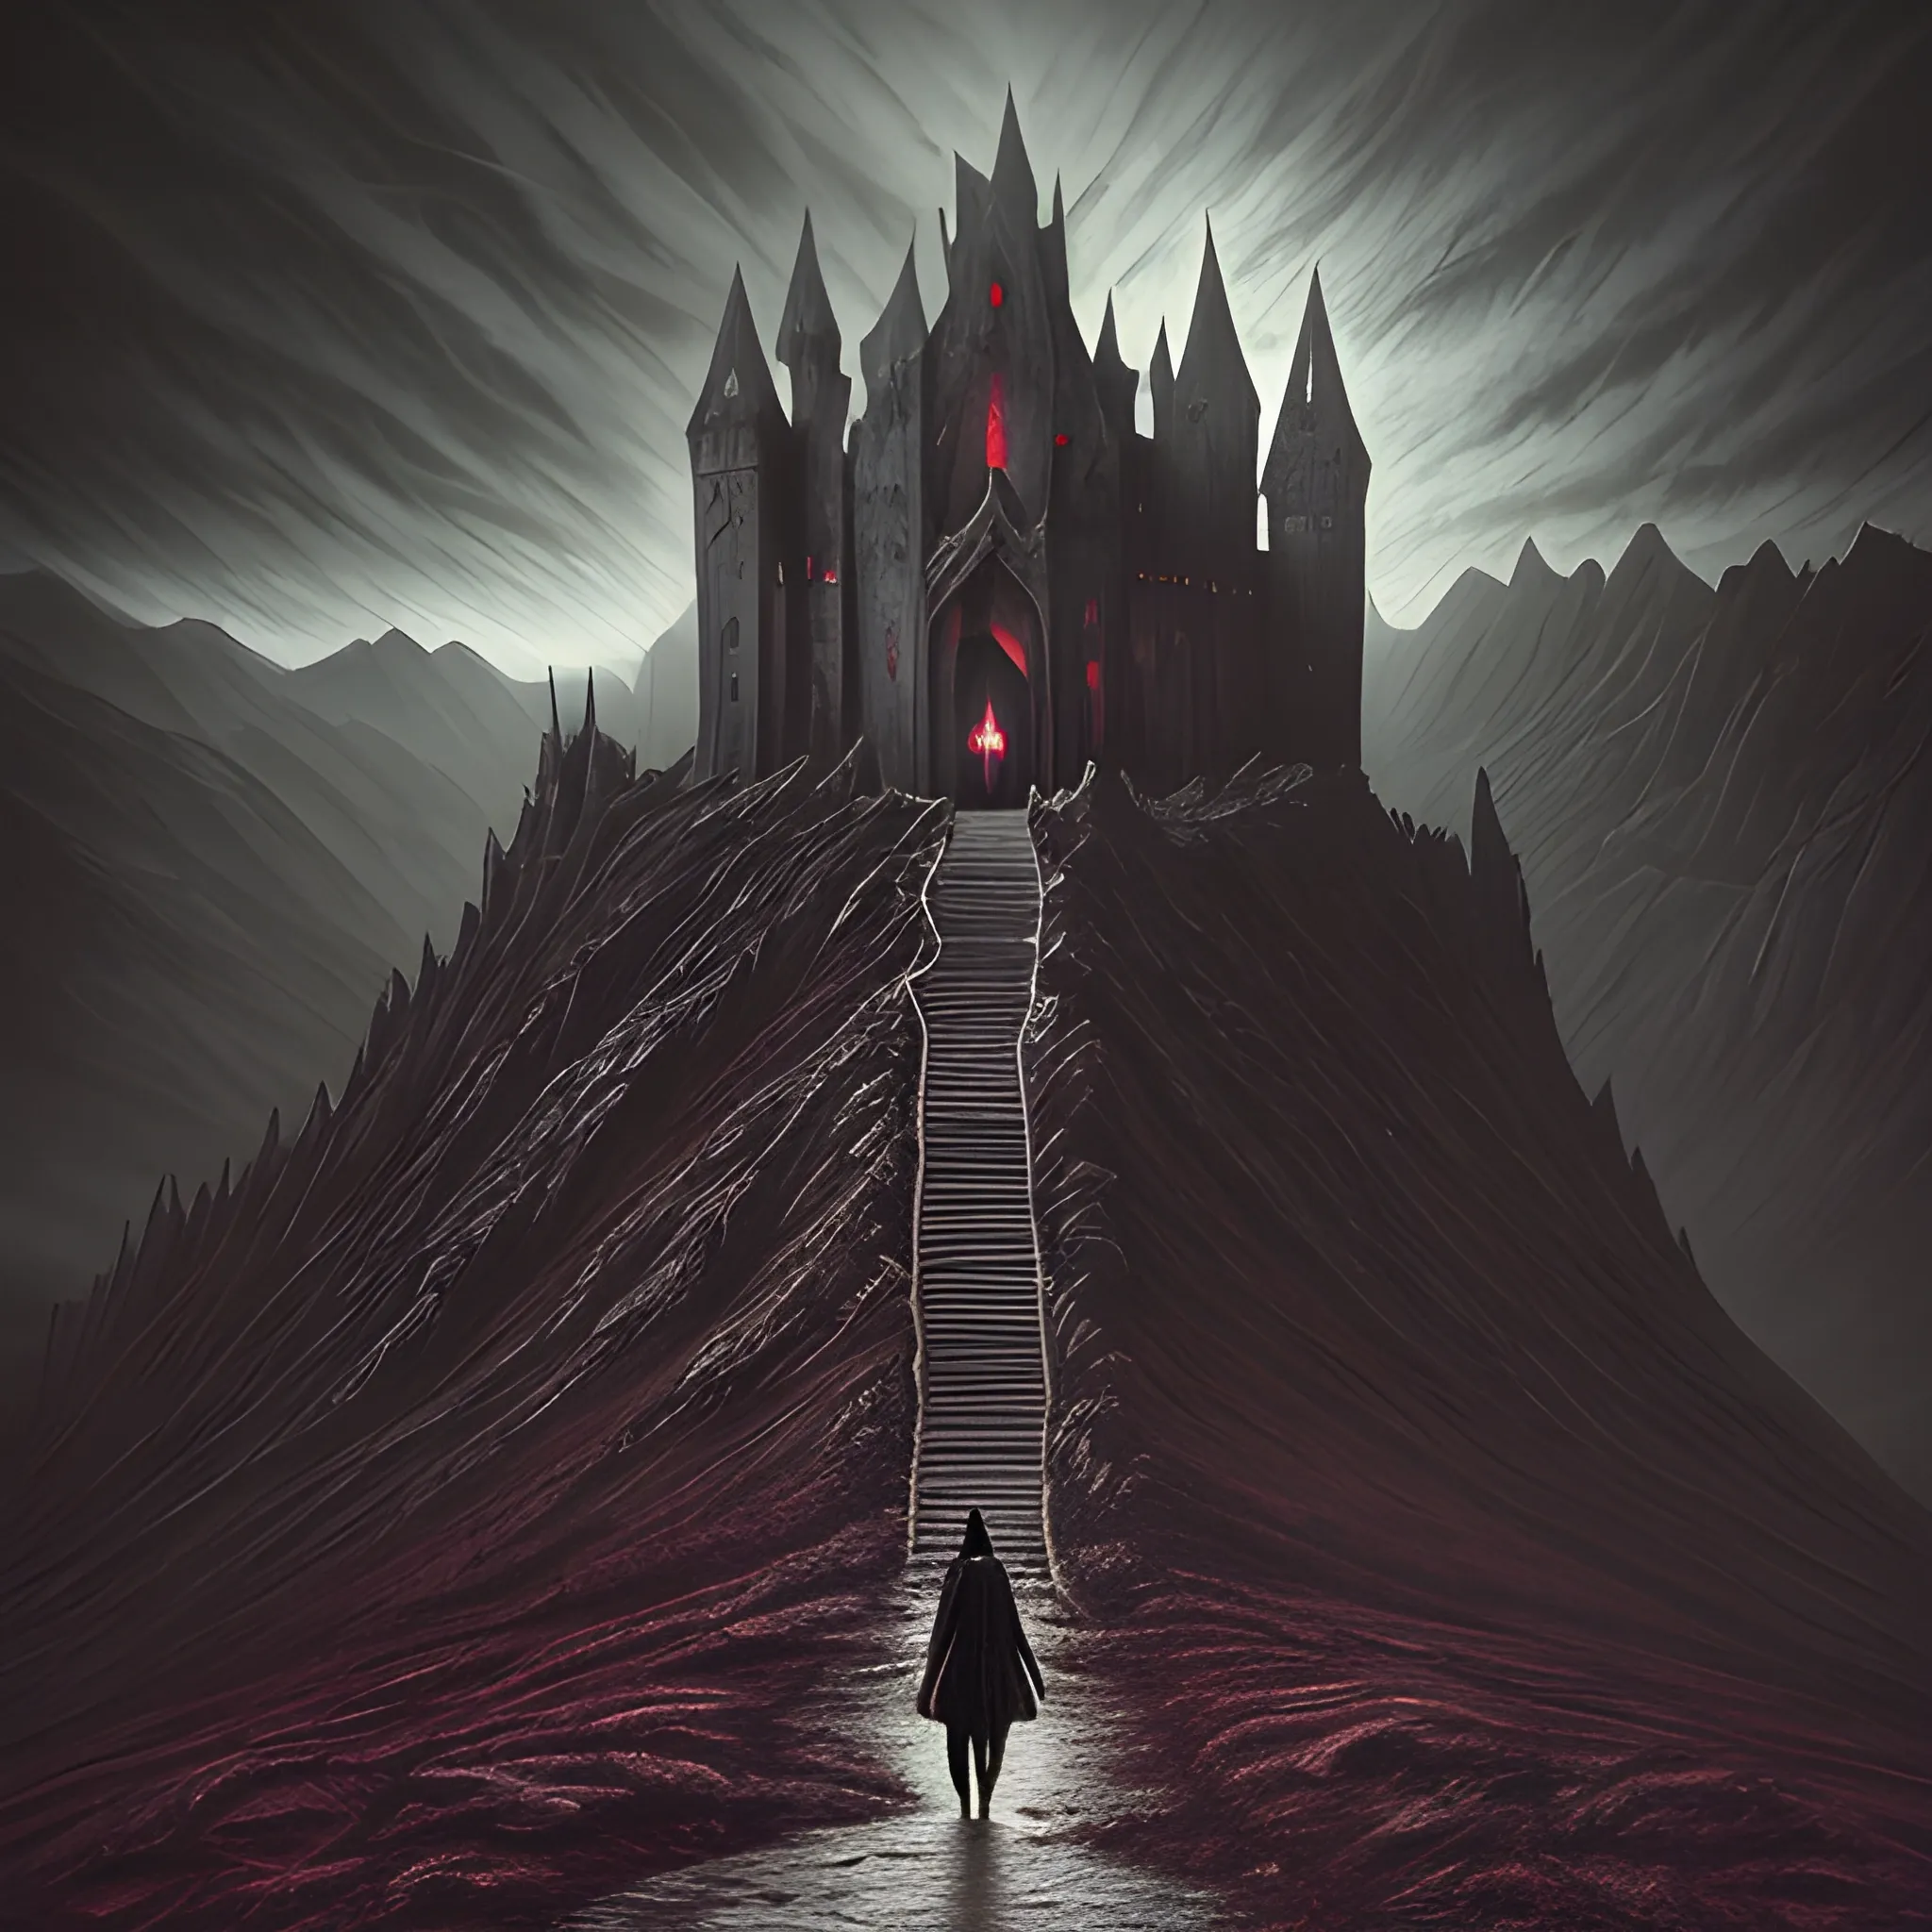 dark fantasy art, satanist walking, mountain pass, mountain range, medieval, dark reddish sky, a river of blood, dead trees, atmospheric aesthetic, surrealism, surrealistic, grim, old ruins, darkness, castle ruins on a mountain